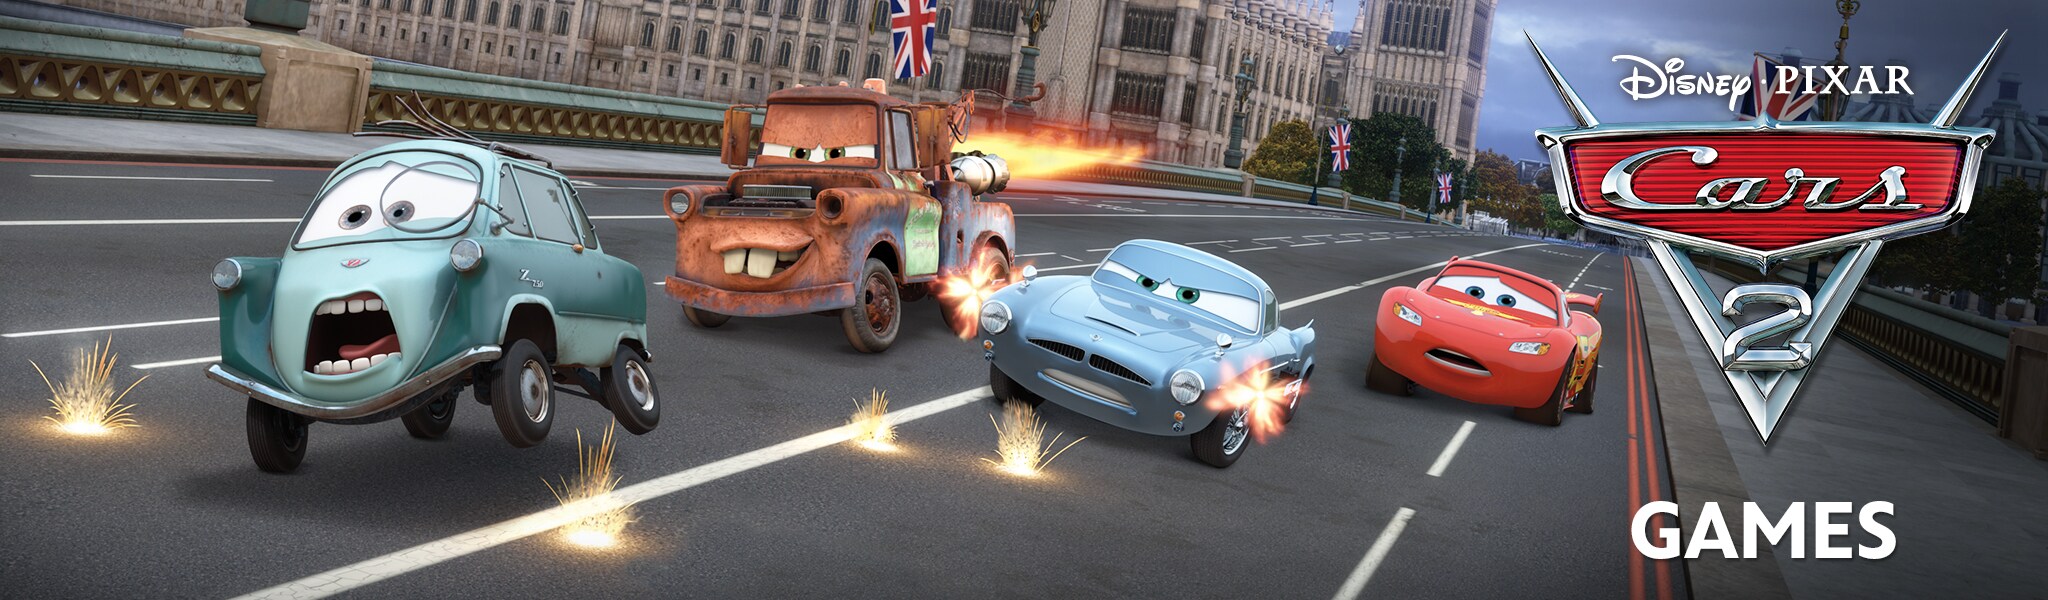 cars 2 game